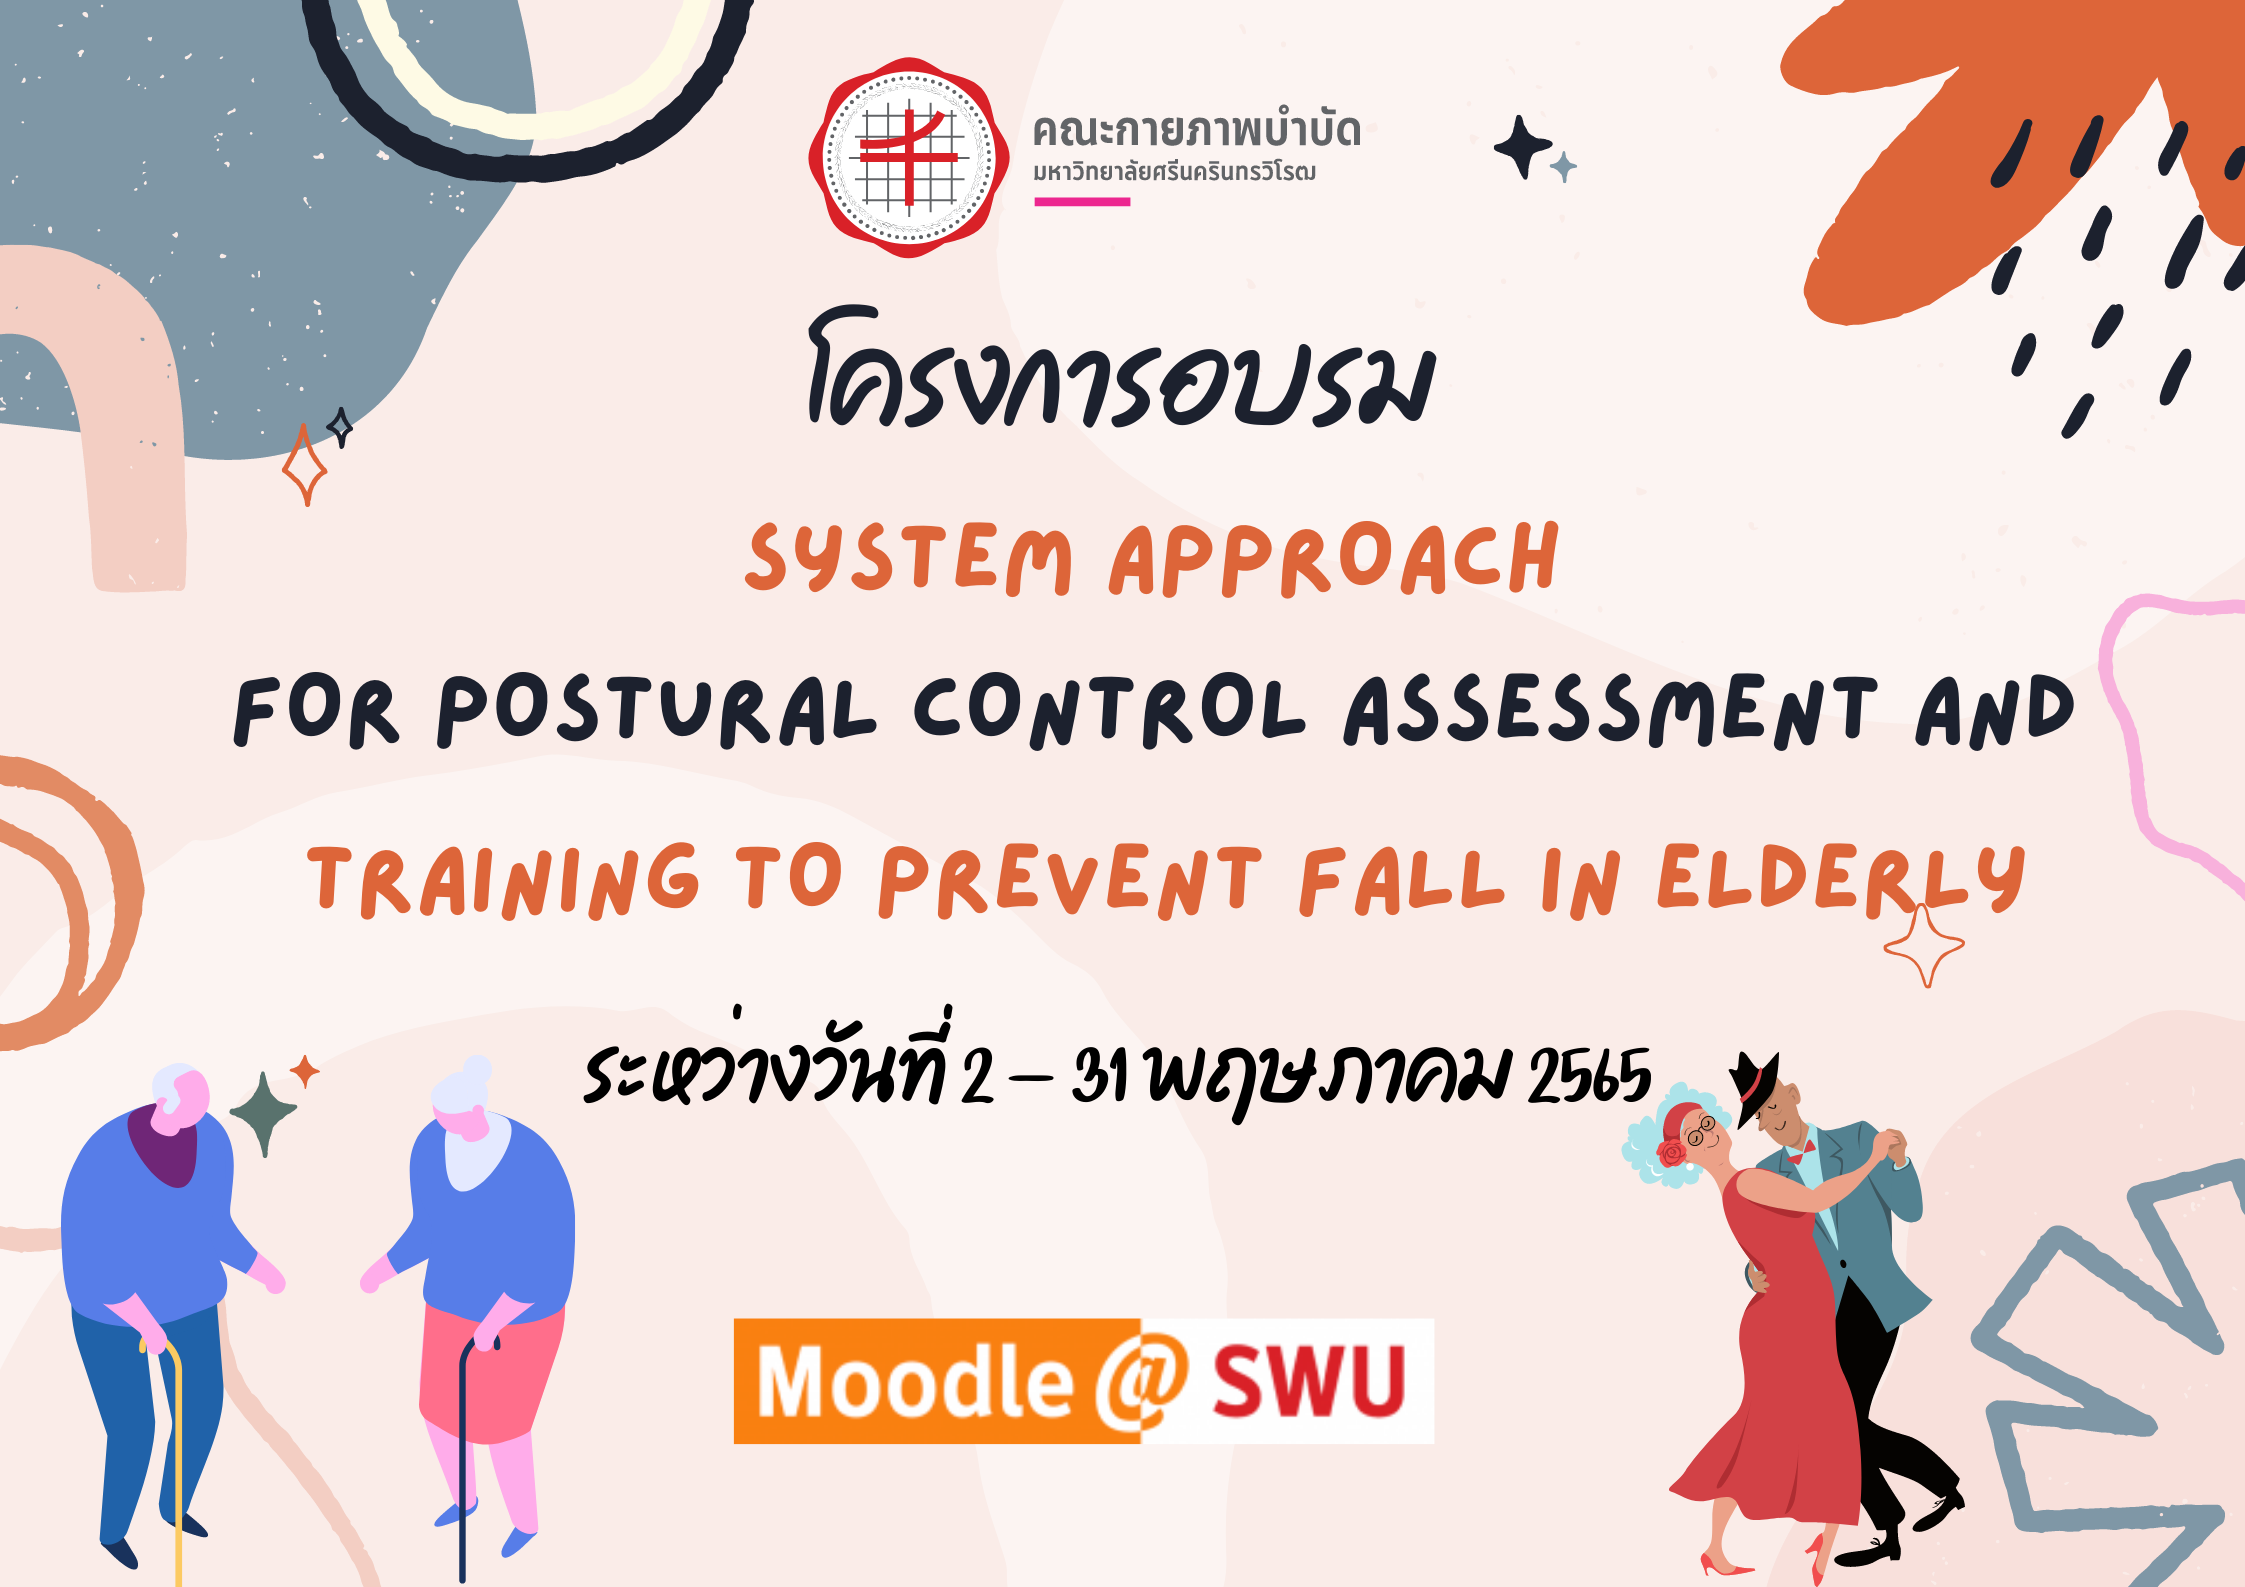 System Approach for Postural Control Assessment and Training to prevent fall in elderly